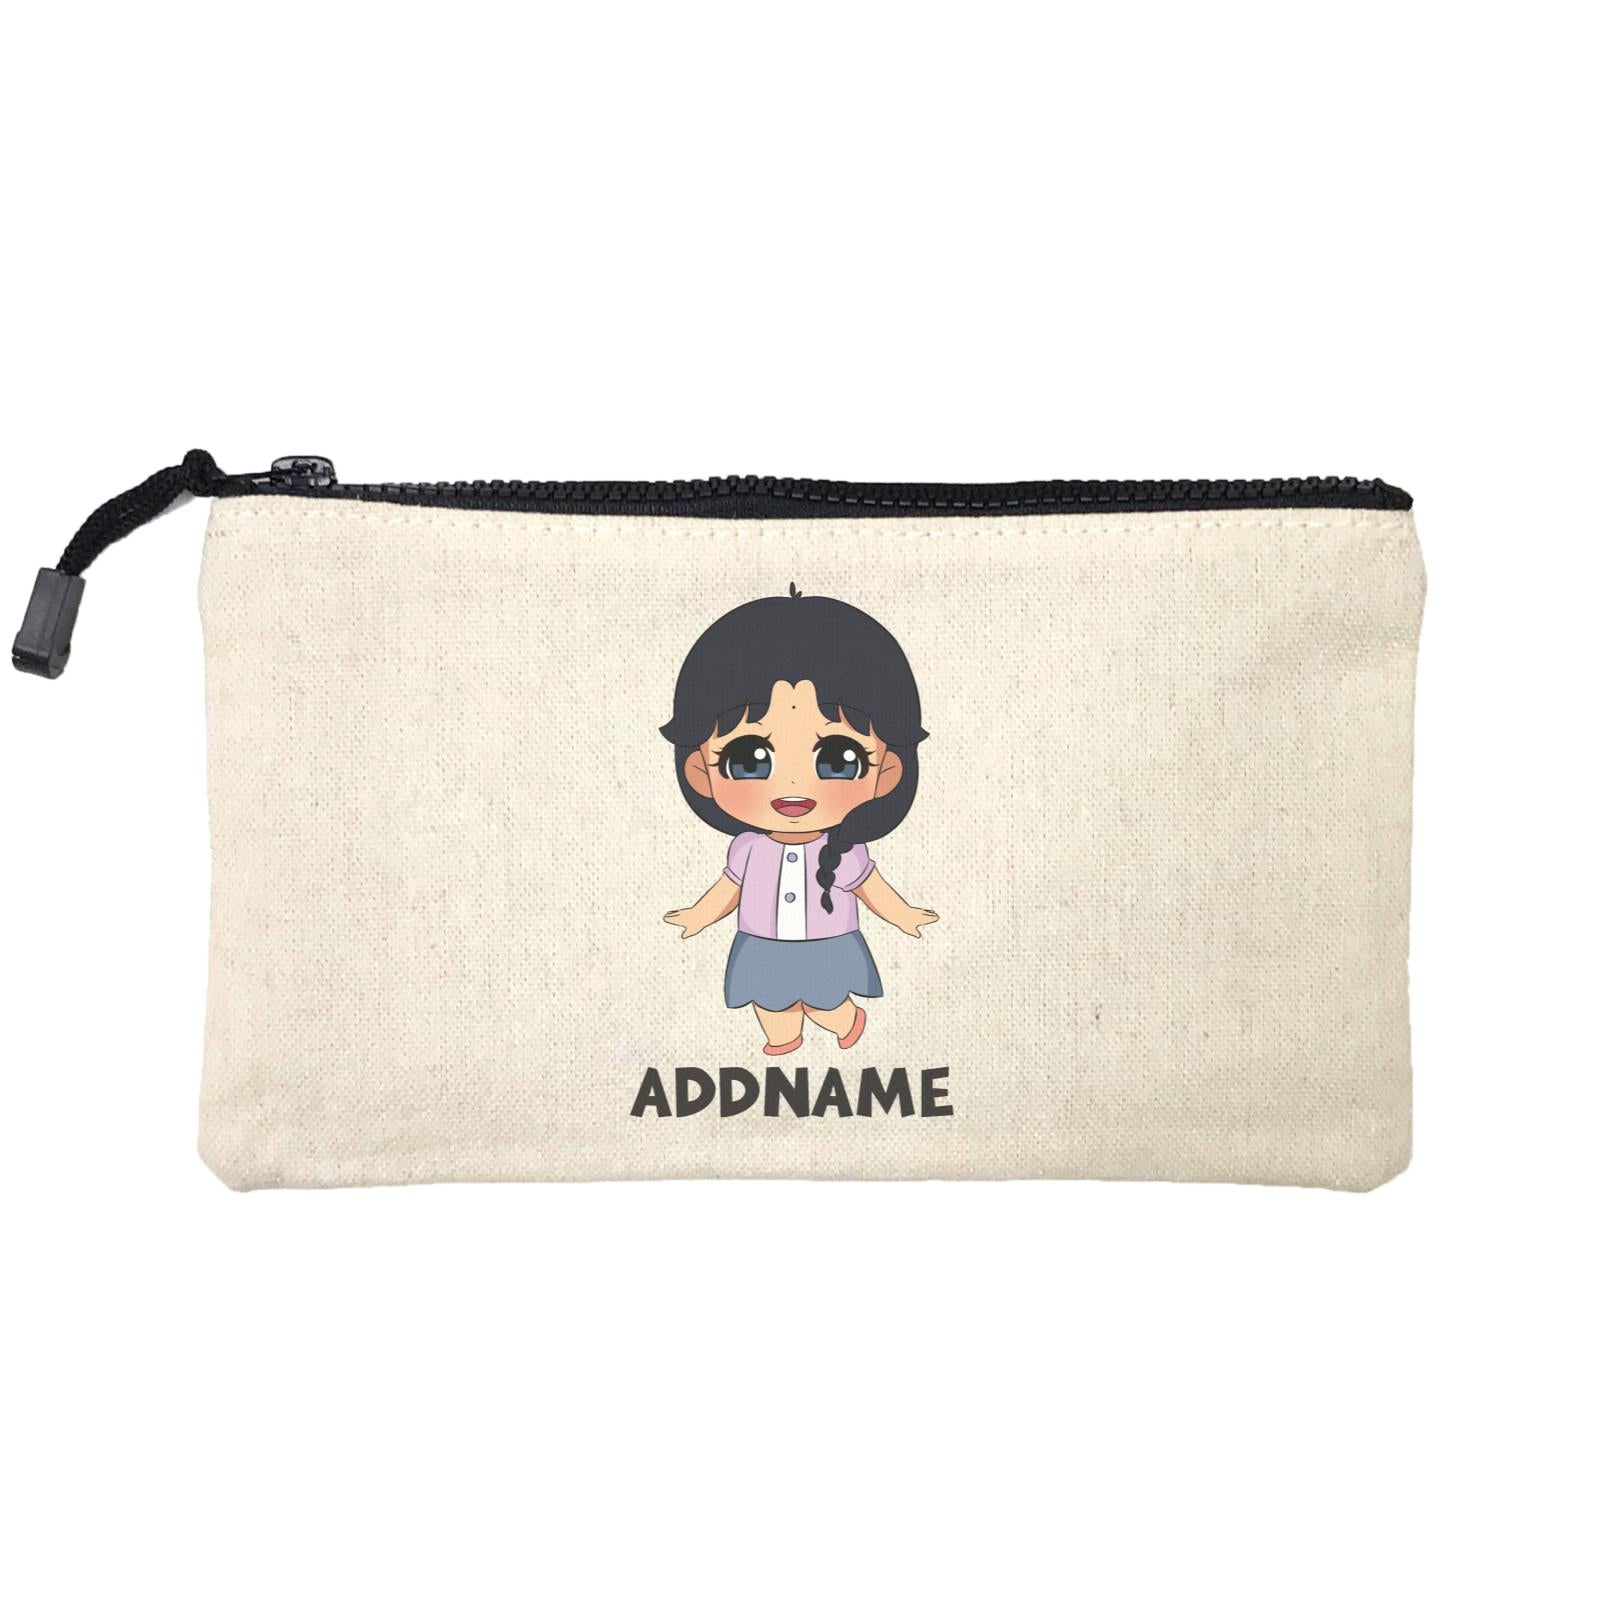 Children's Day Gift Series Little Indian Girl Addname SP Stationery Pouch